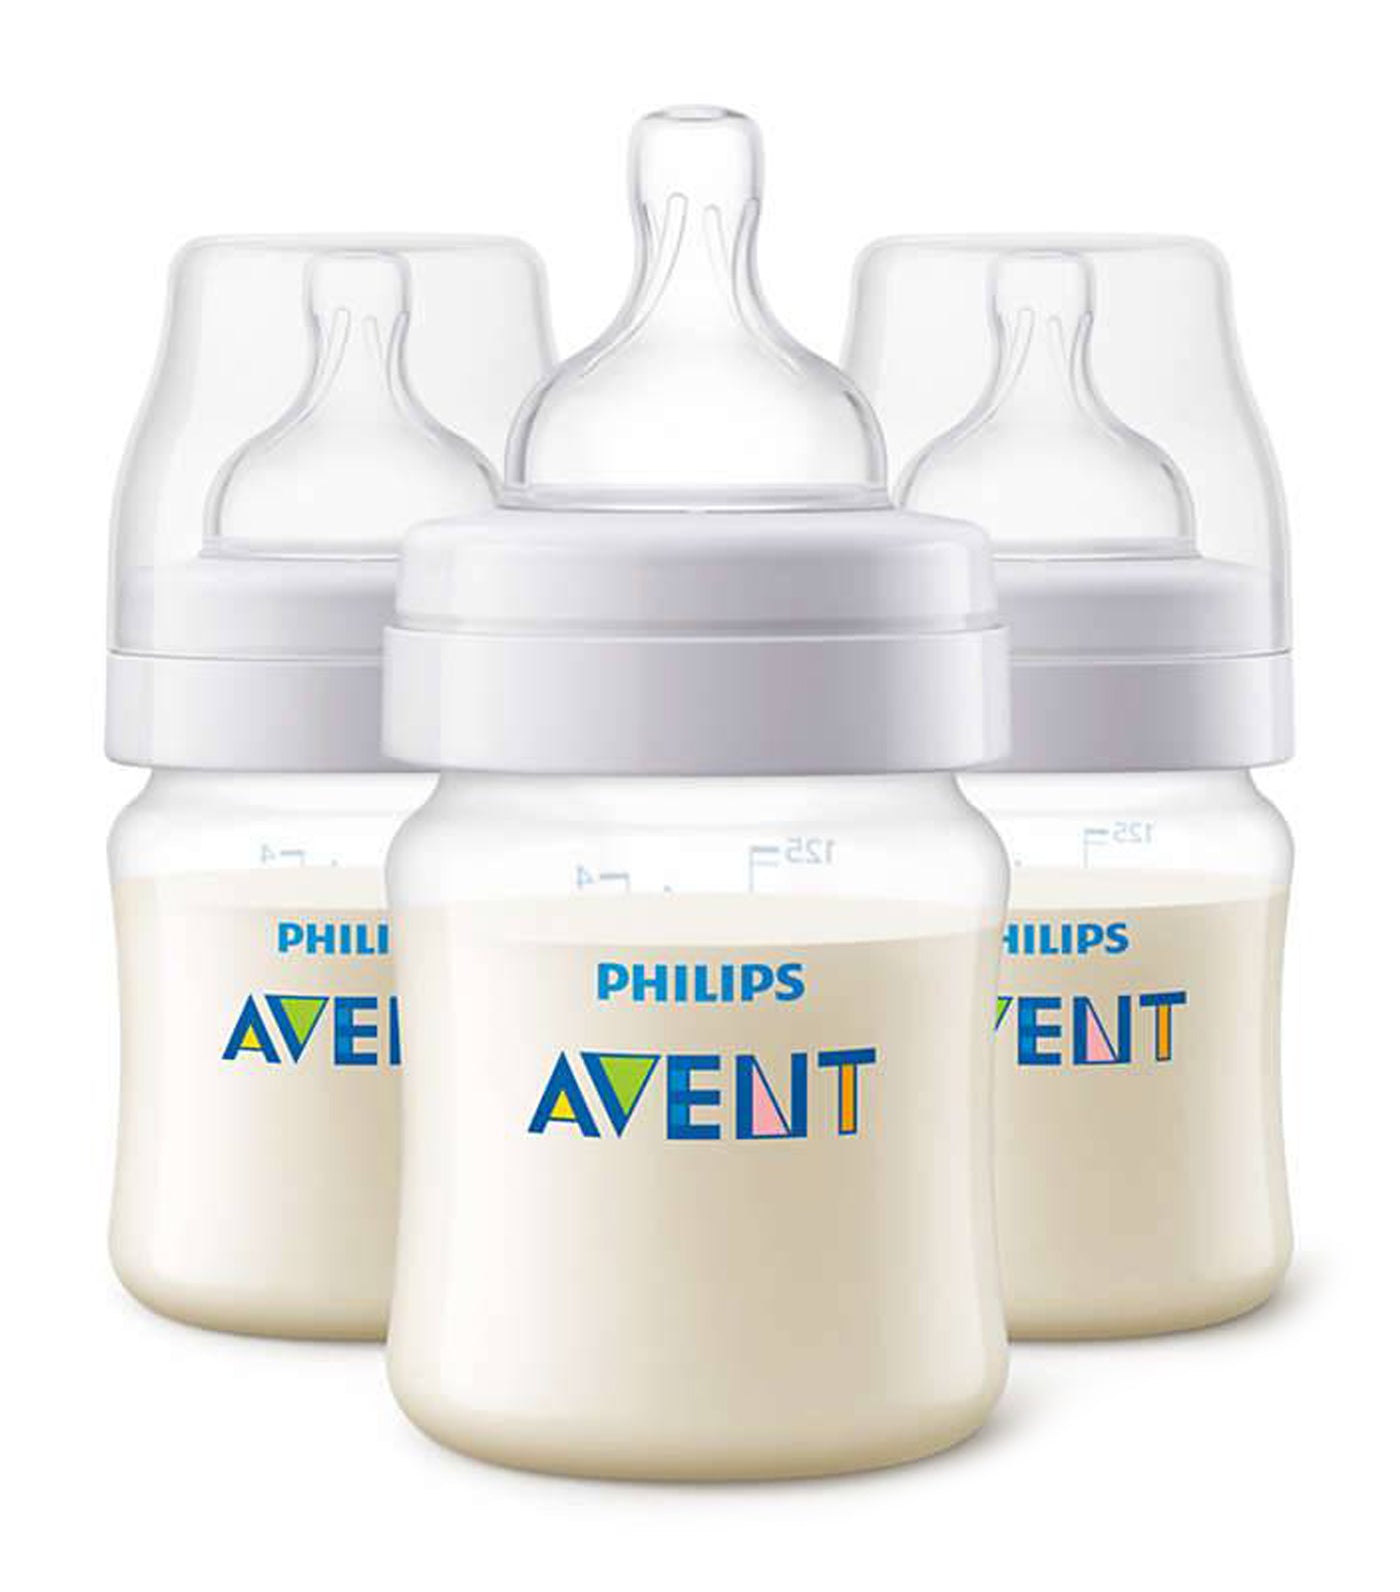 philips avent anti-colic baby bottle (3-pack) 4oz